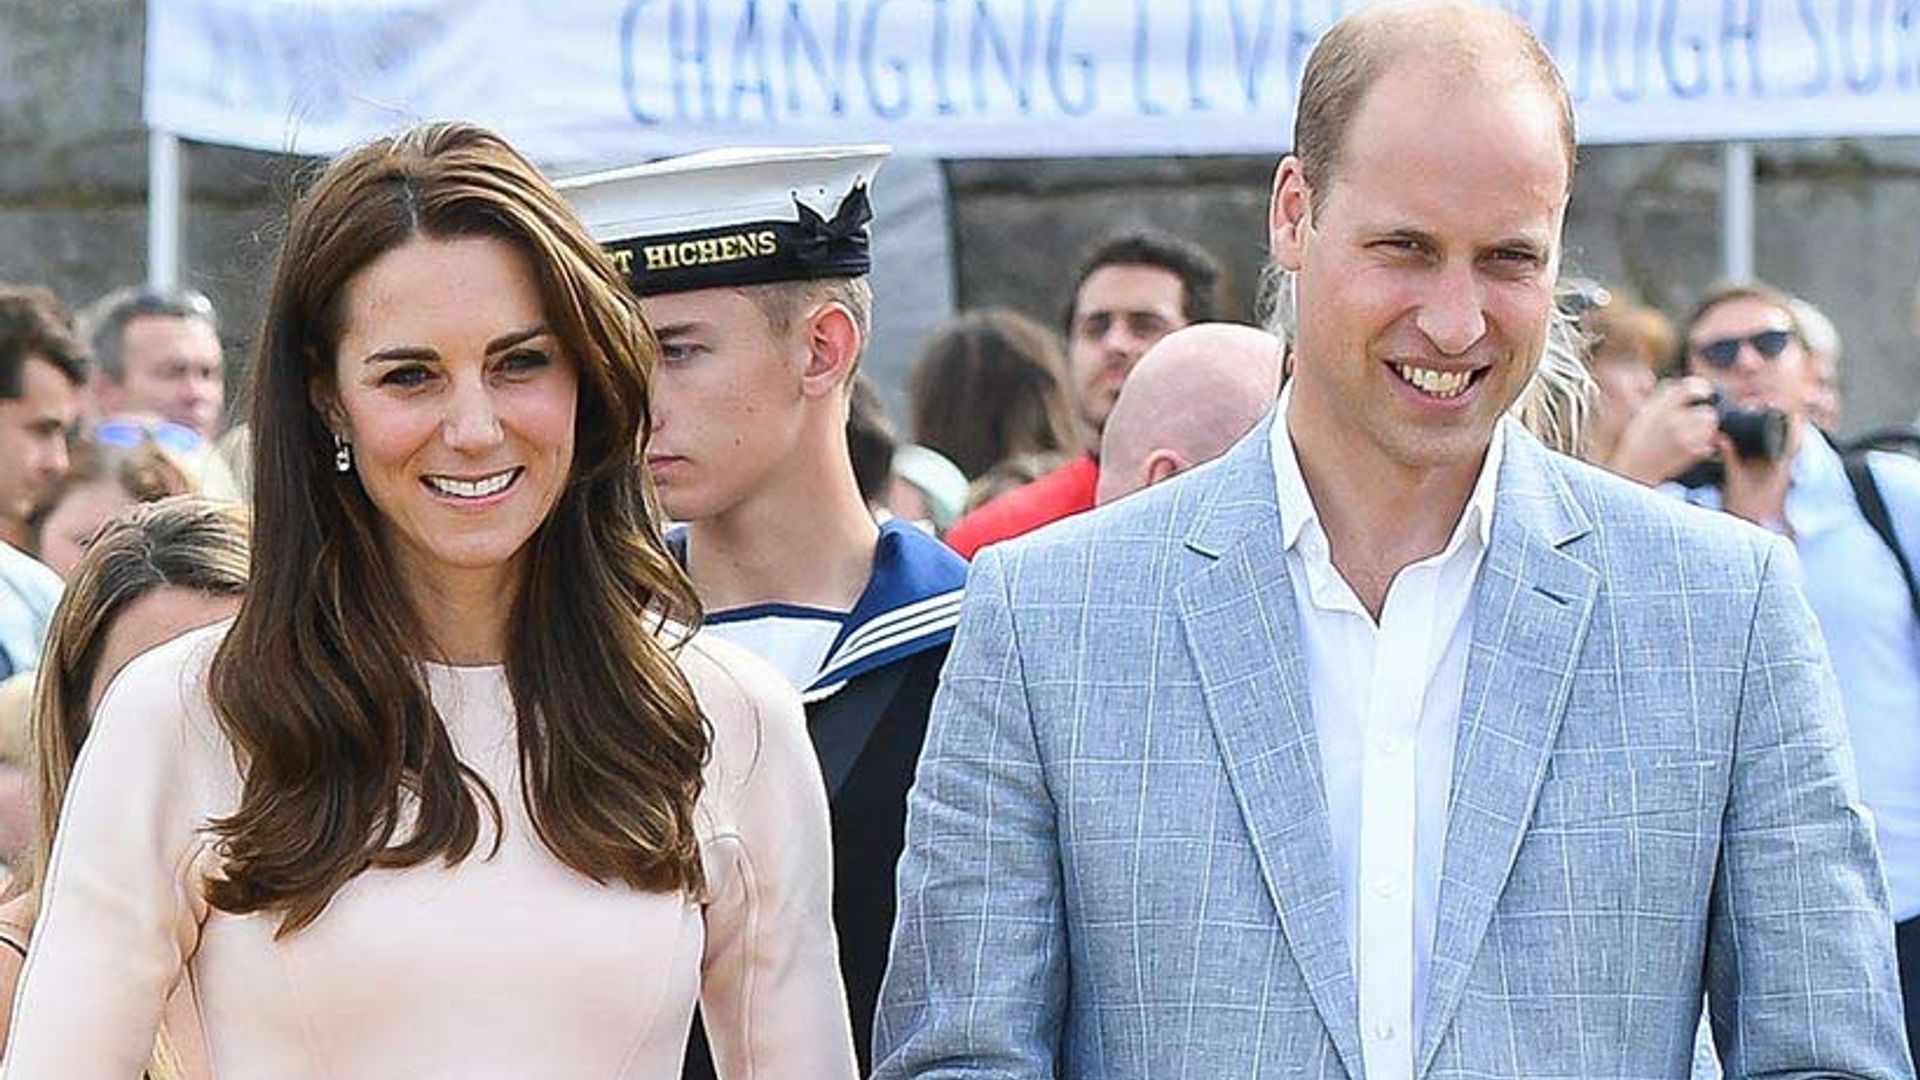 William-and-kate